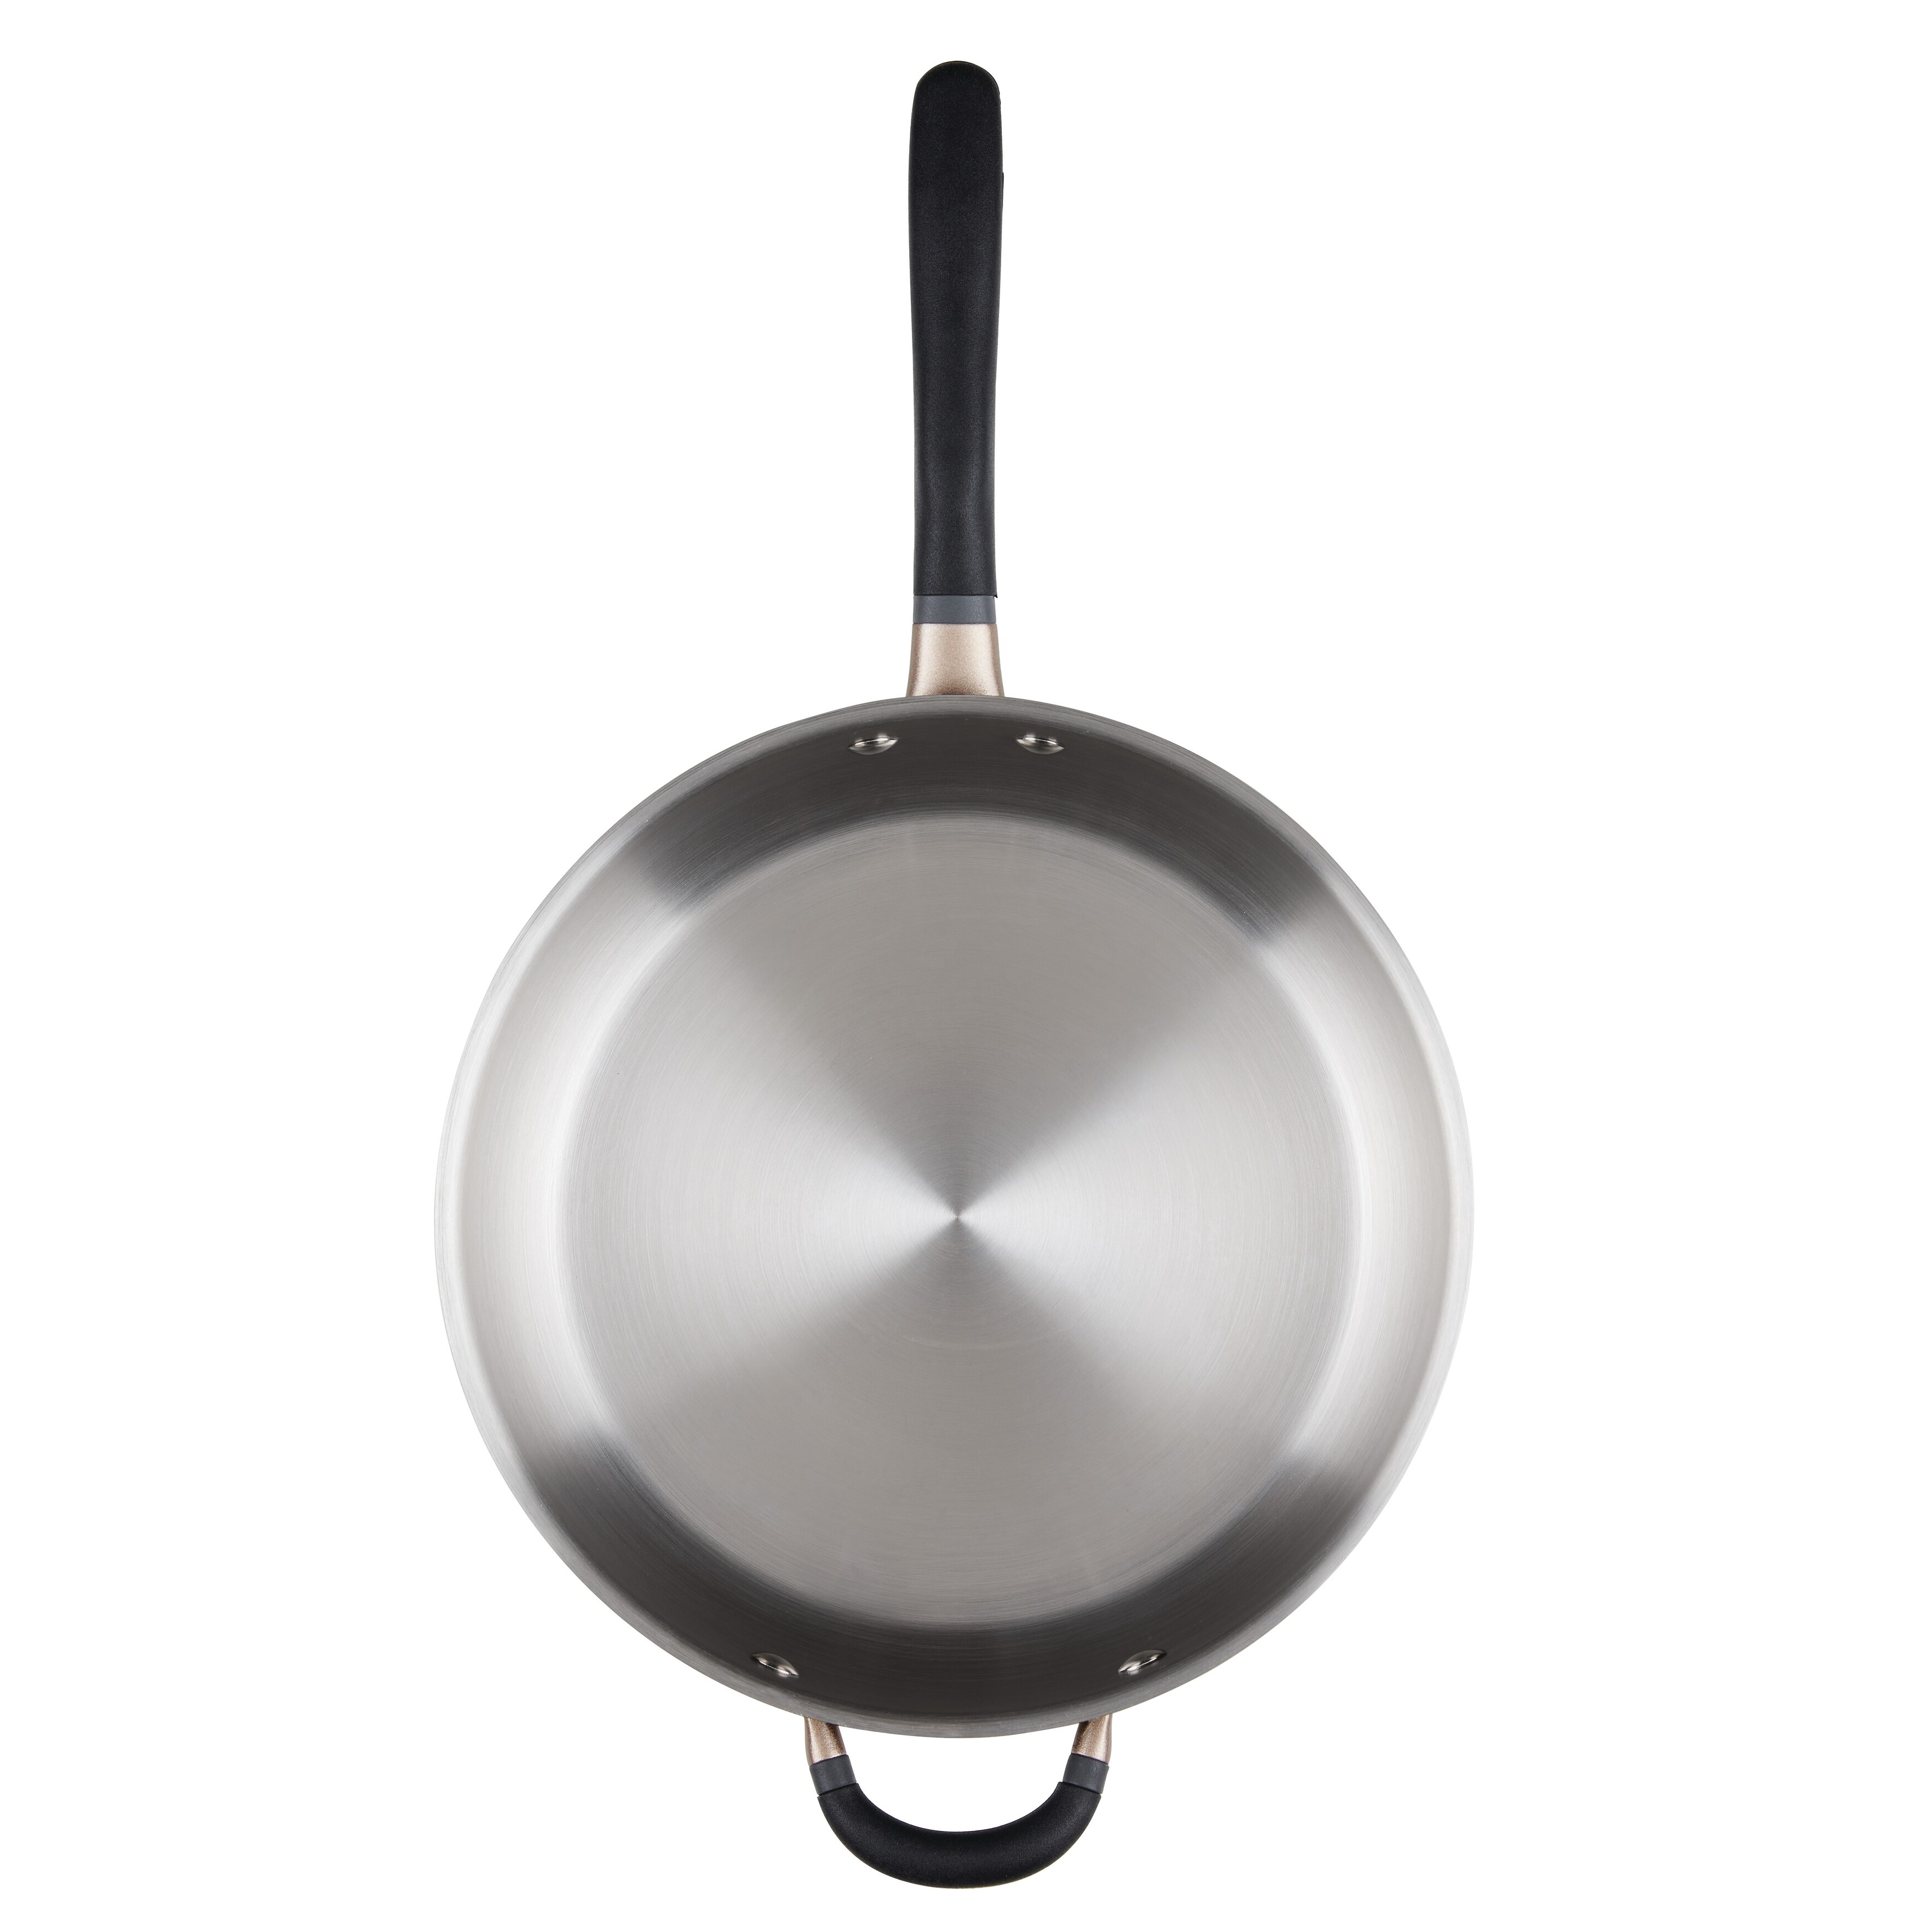 https://ak1.ostkcdn.com/images/products/is/images/direct/2ae18567365cb9c5cceadcd77ac274b50295e643/Meyer-Accent-Series-Stainless-Steel-Induction-Saute-Pan%2C-4.5-Quart%2C-Matte-Black.jpg